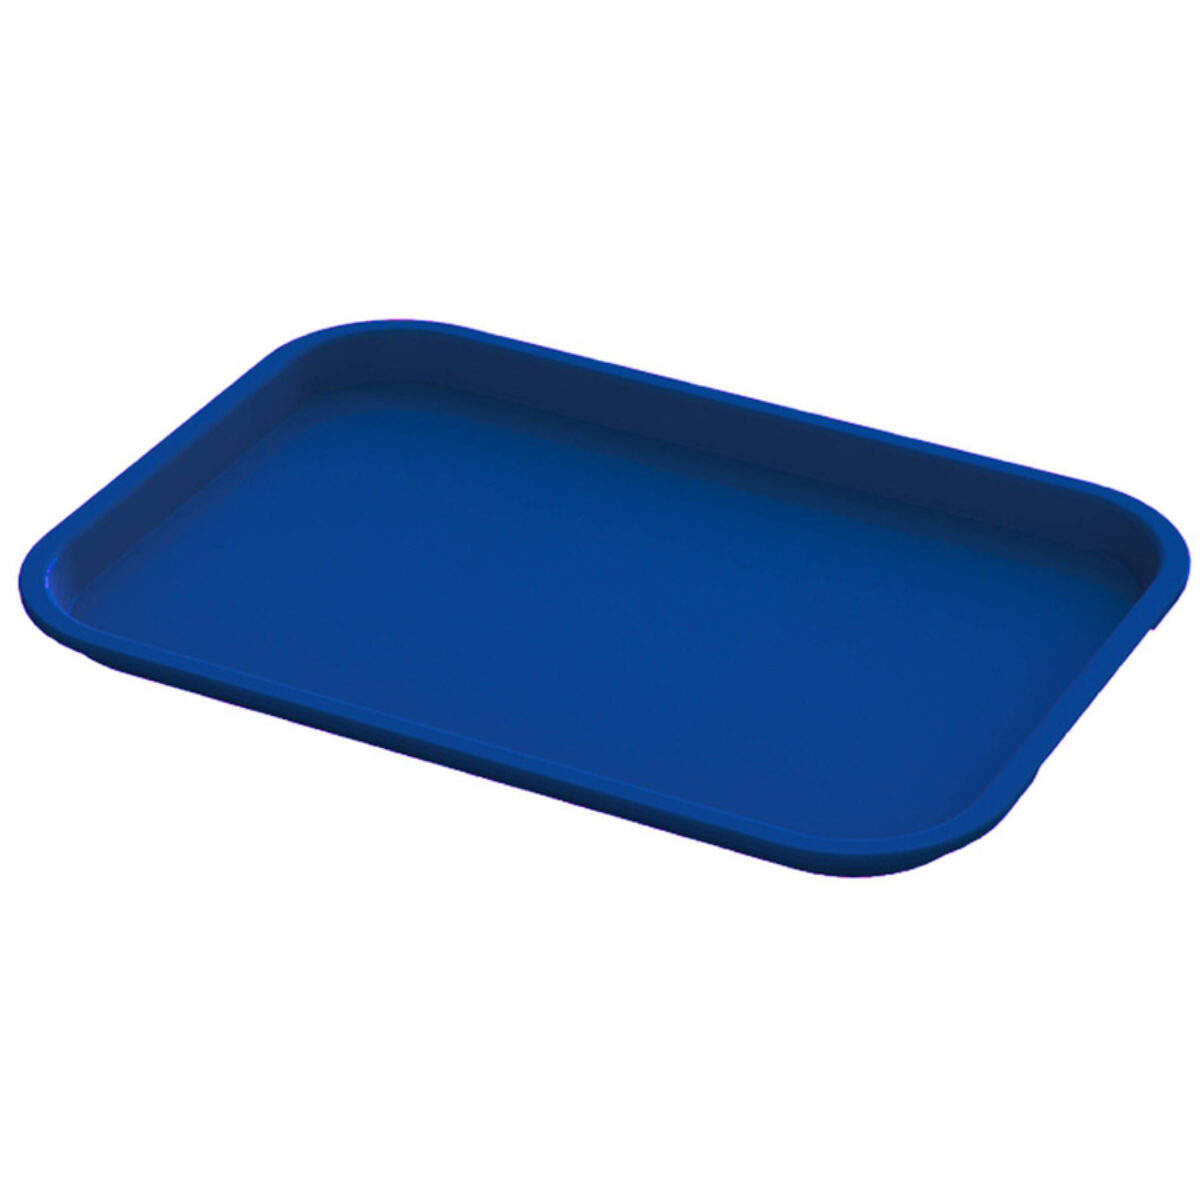 https://doyleshamrock.com/main/wp-content/uploads/schema-and-structured-data-for-wp/blue-plastic-serving-trays-10-x-14-inch-1200x1200.jpg